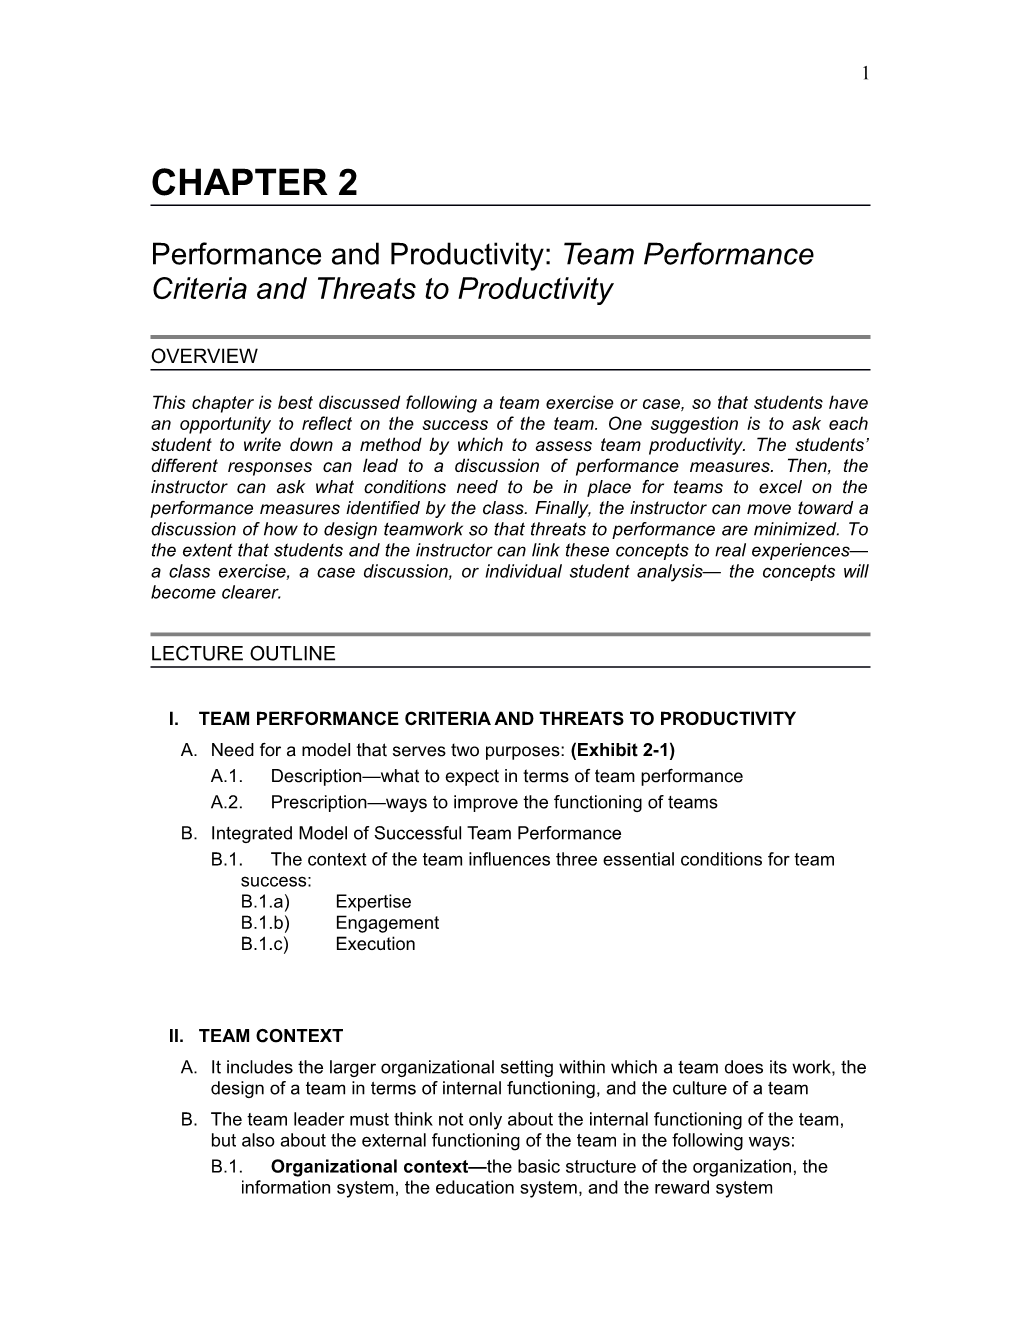 Performance and Productivity: Team Performance Criteria and Threats to Productivity